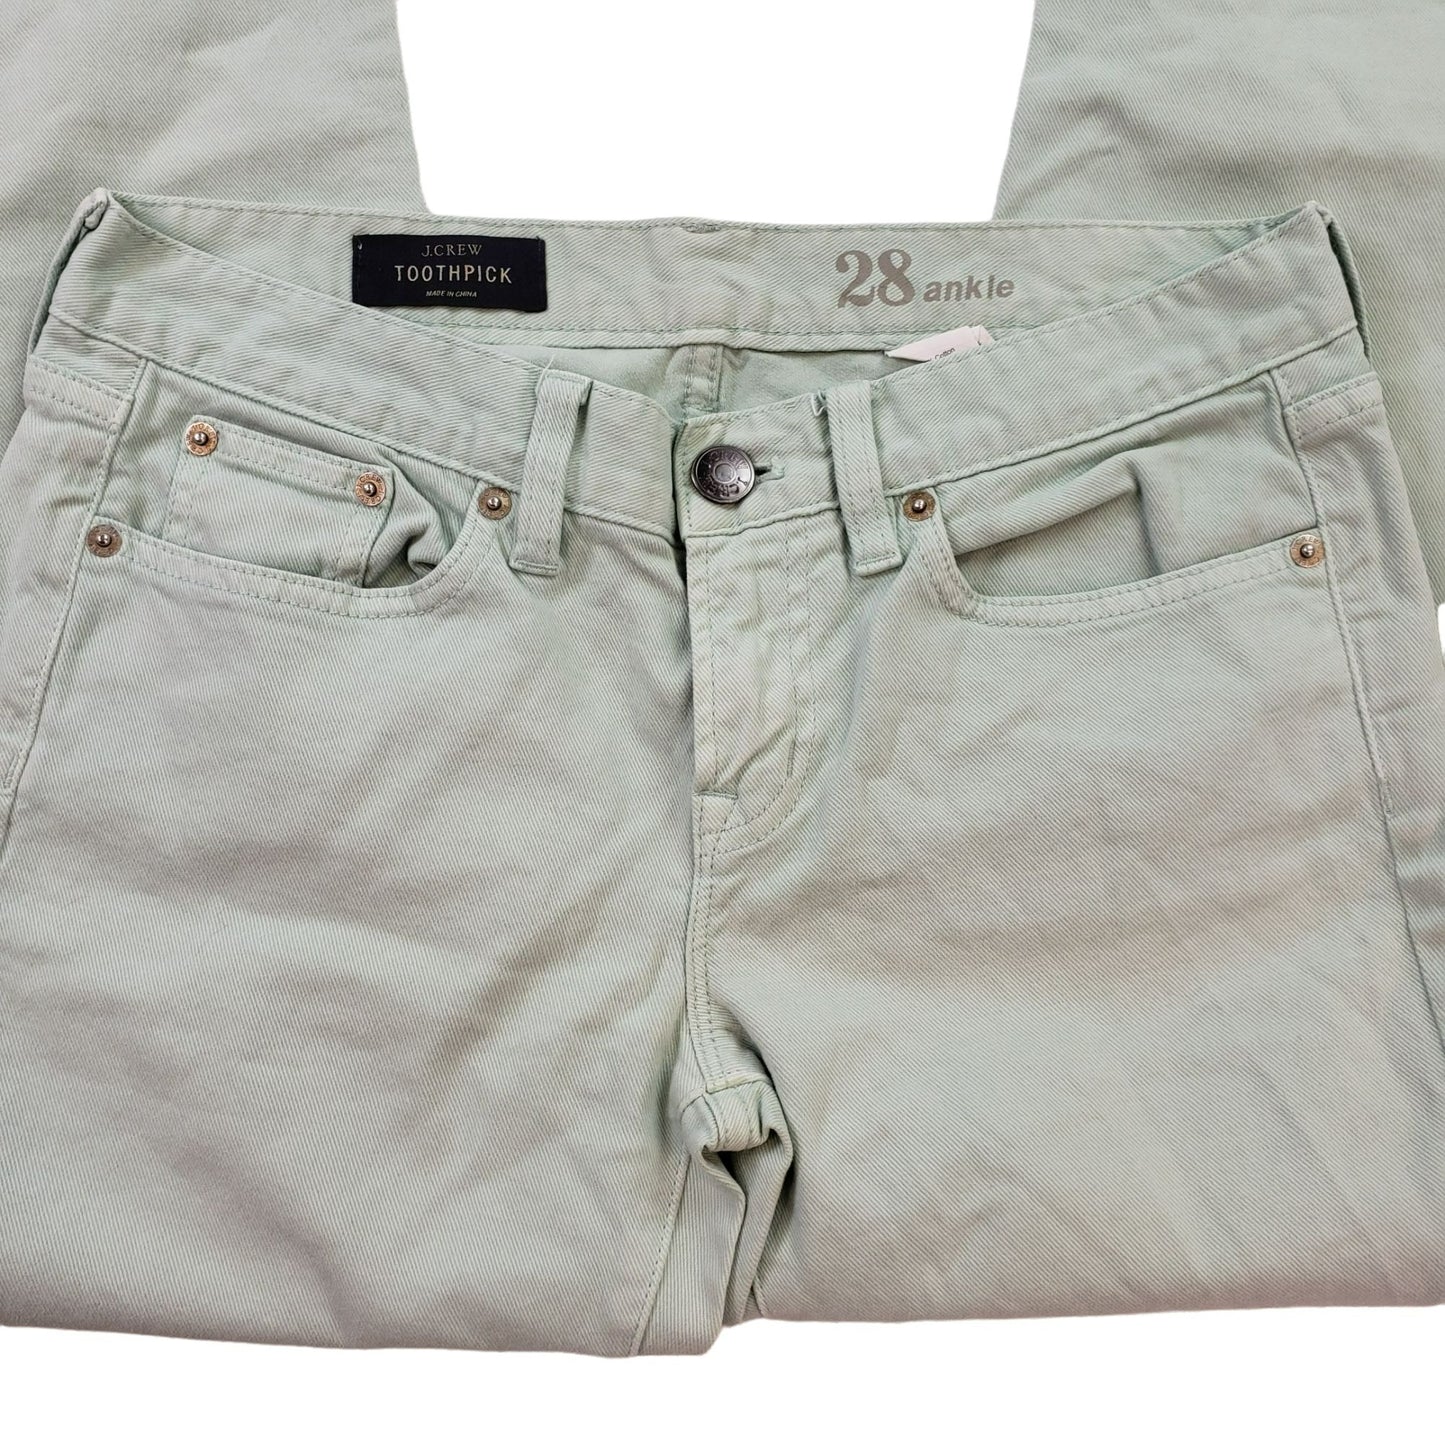 J. Crew Mint Green Toothpick Skinny Ankle Jeans Size 28